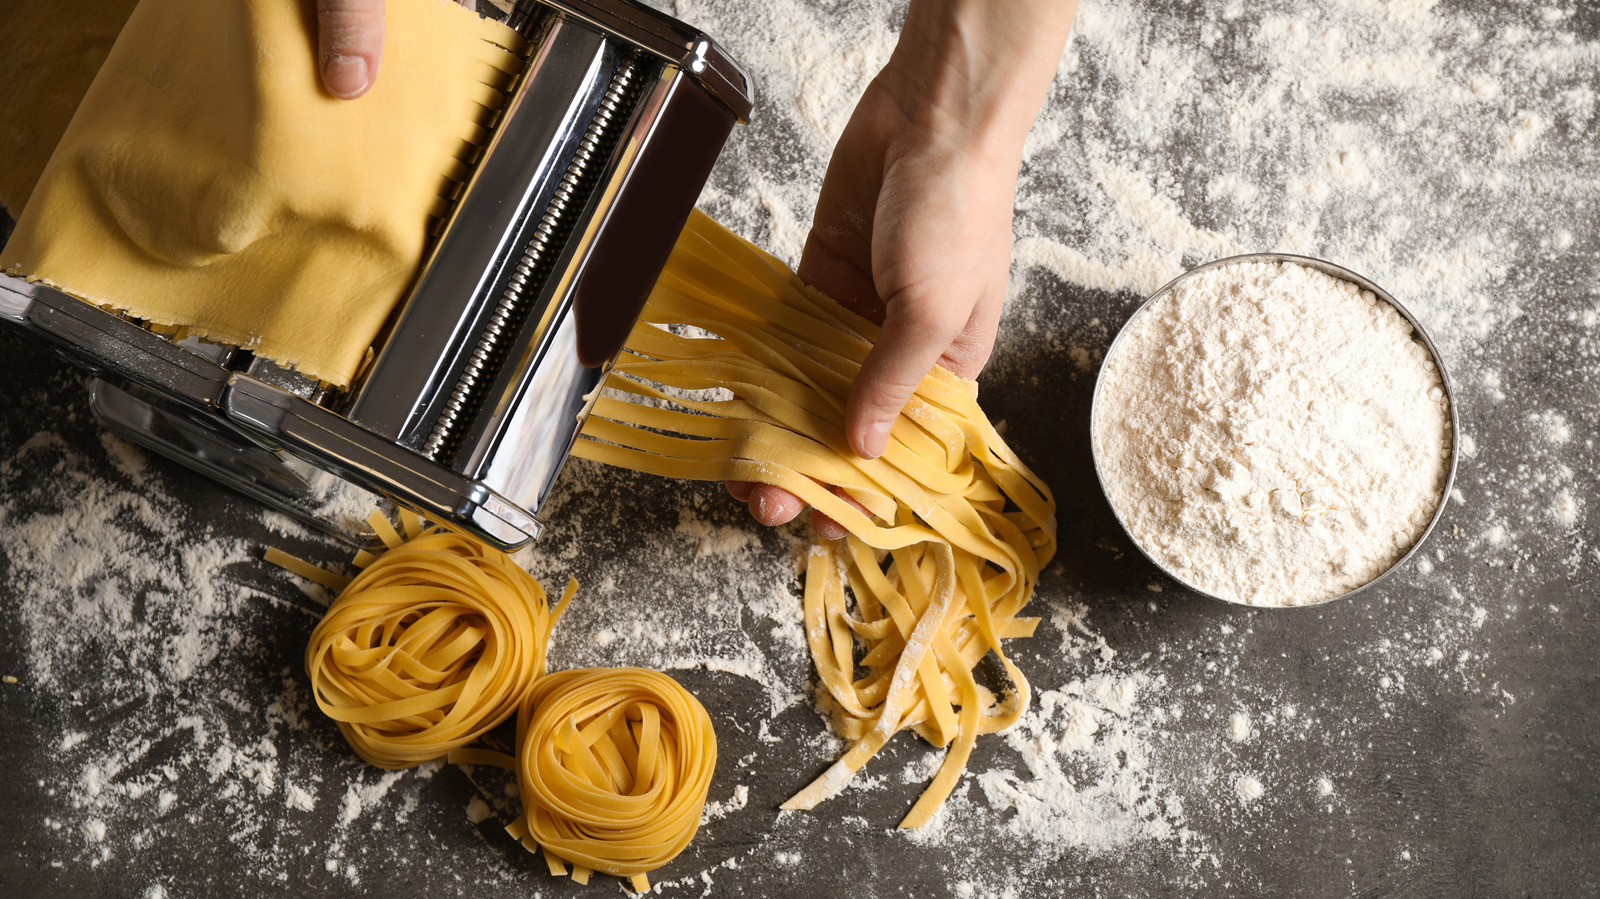 https://www.mashed.com/img/gallery/the-best-pasta-makers-of-2022/l-intro-1663692330.jpg